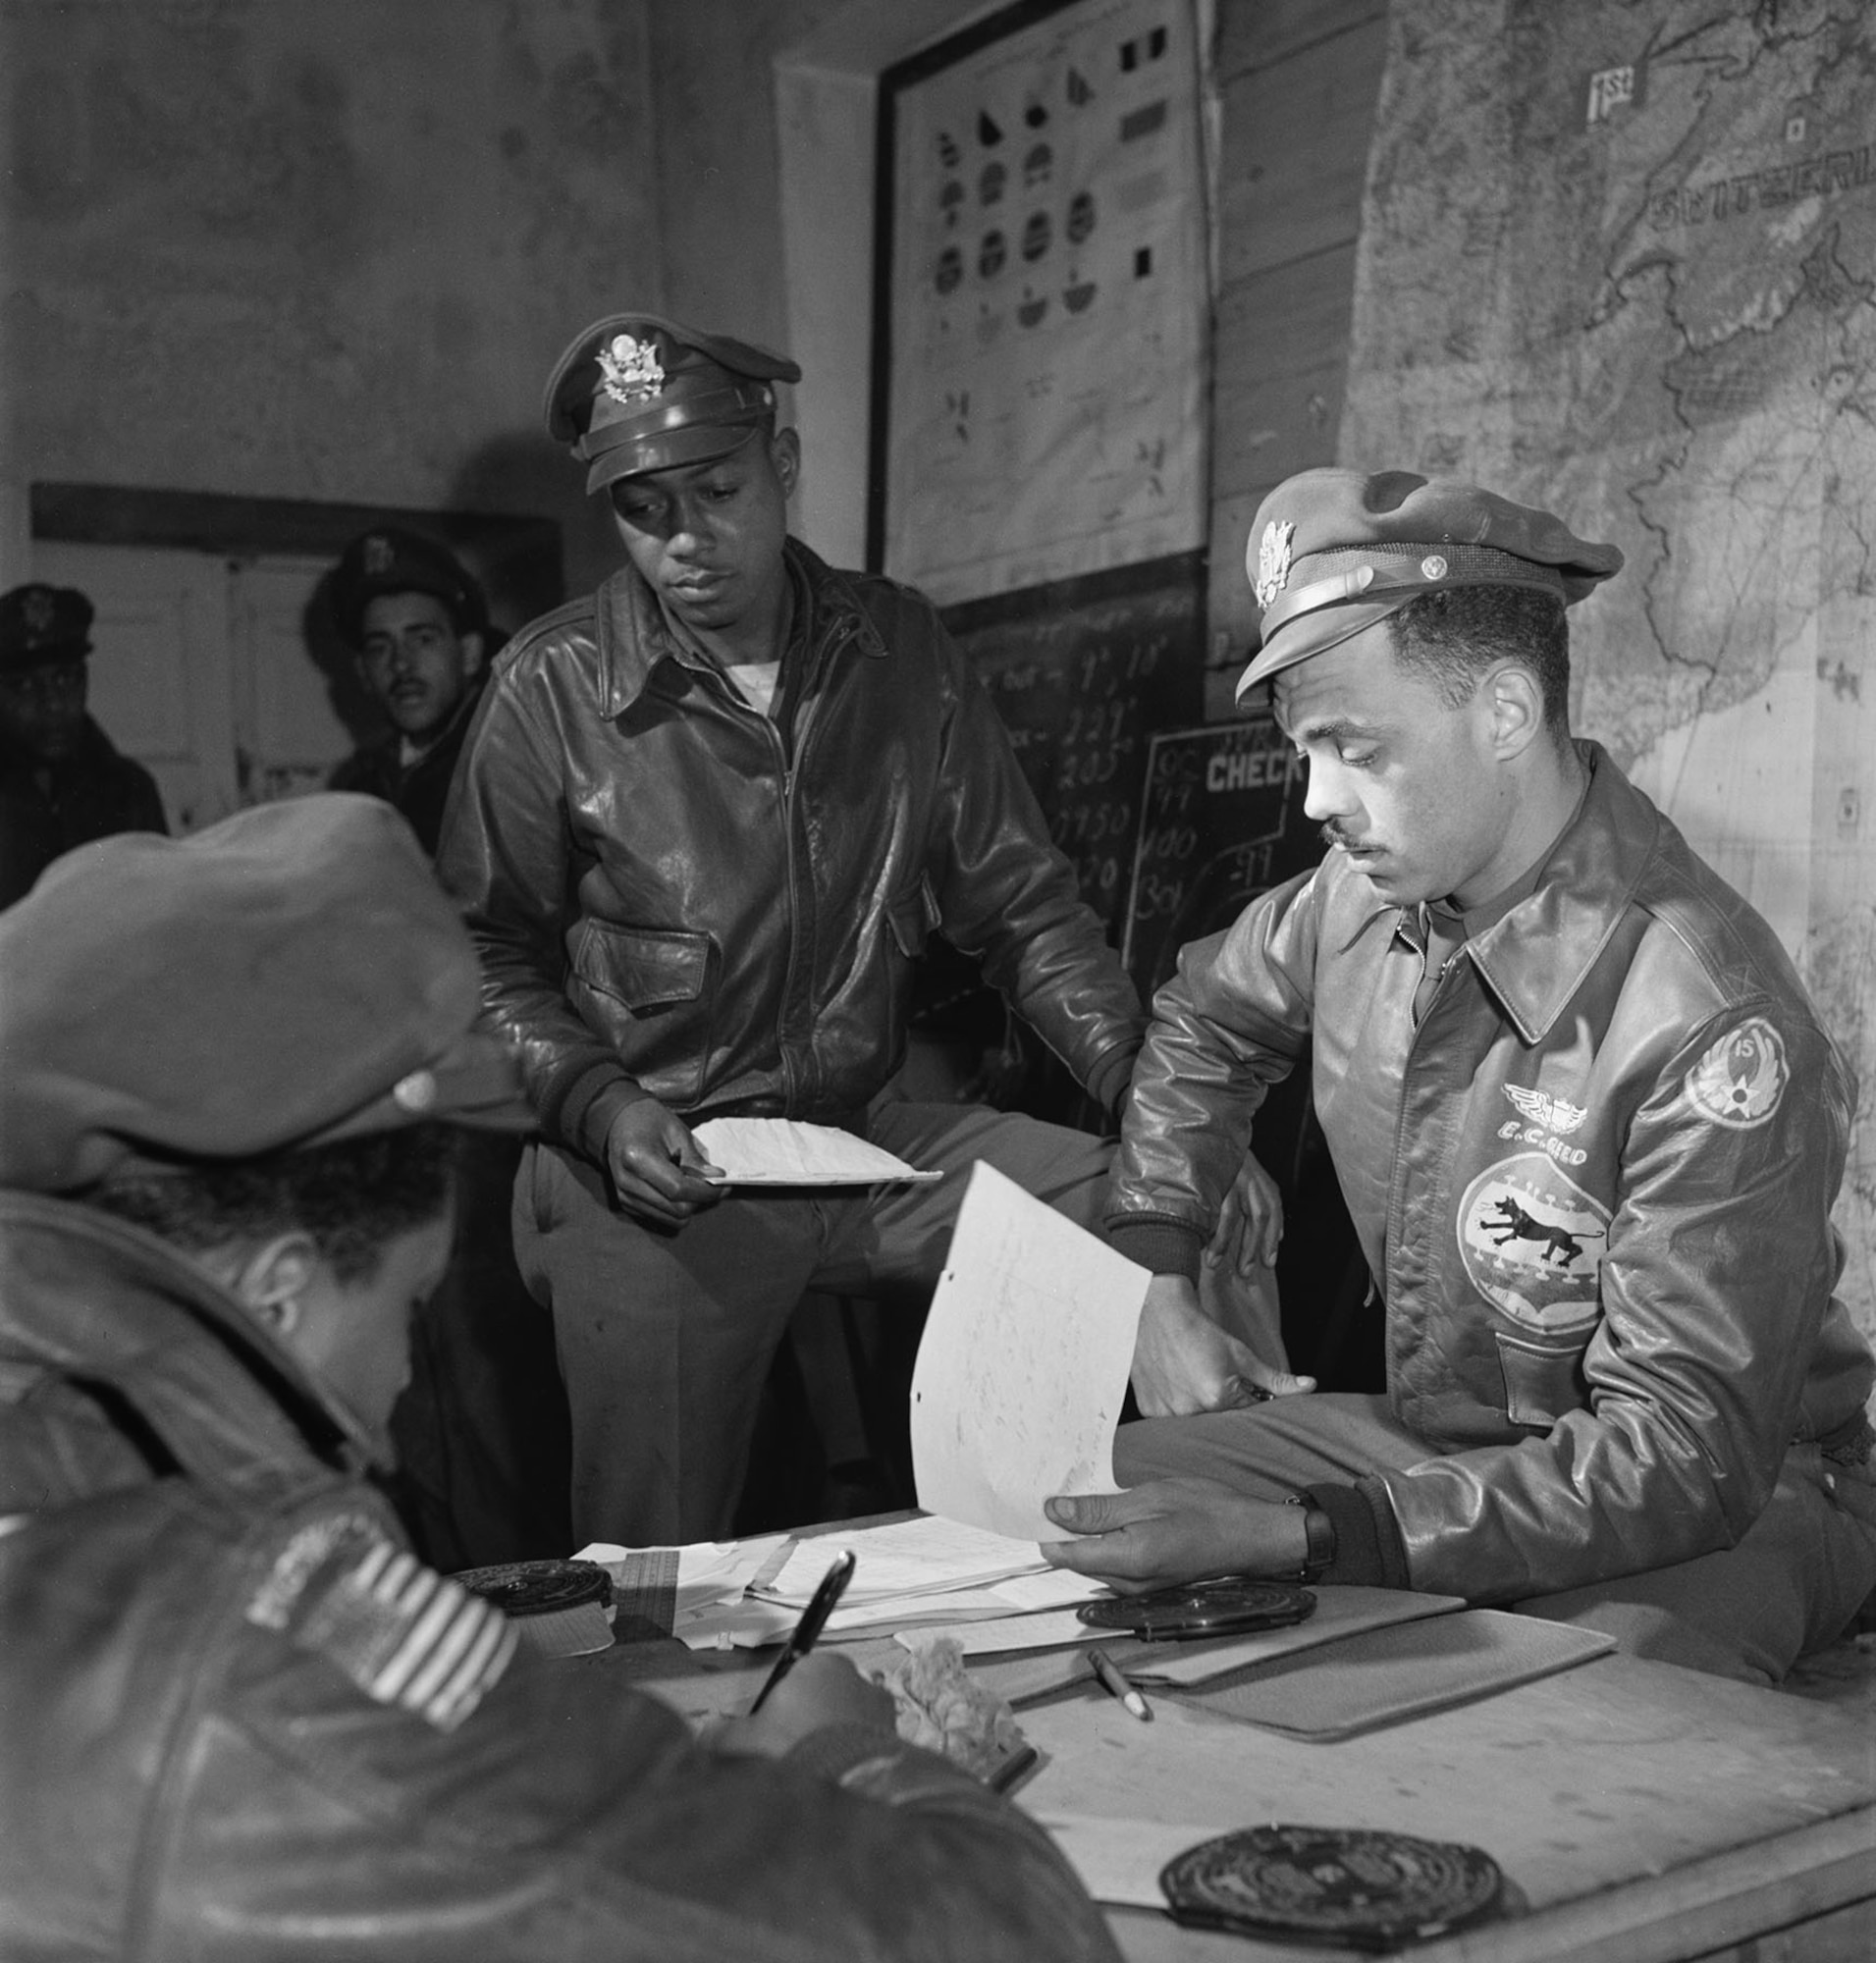 Wearing the jacket on display at the National Museum of the U.S. Air Force, Capt. (later Col.) Edward C. Gleed (right), the 332nd Fighter Group’s operations officer and Lt. (later Lt. Col.) Woodrow W. Crockett (center) plan for a mission in March 1945. Note that Gleed later removed the 15th Air Force emblem from the jacket’s left sleeve. (U.S. Air Force photo)